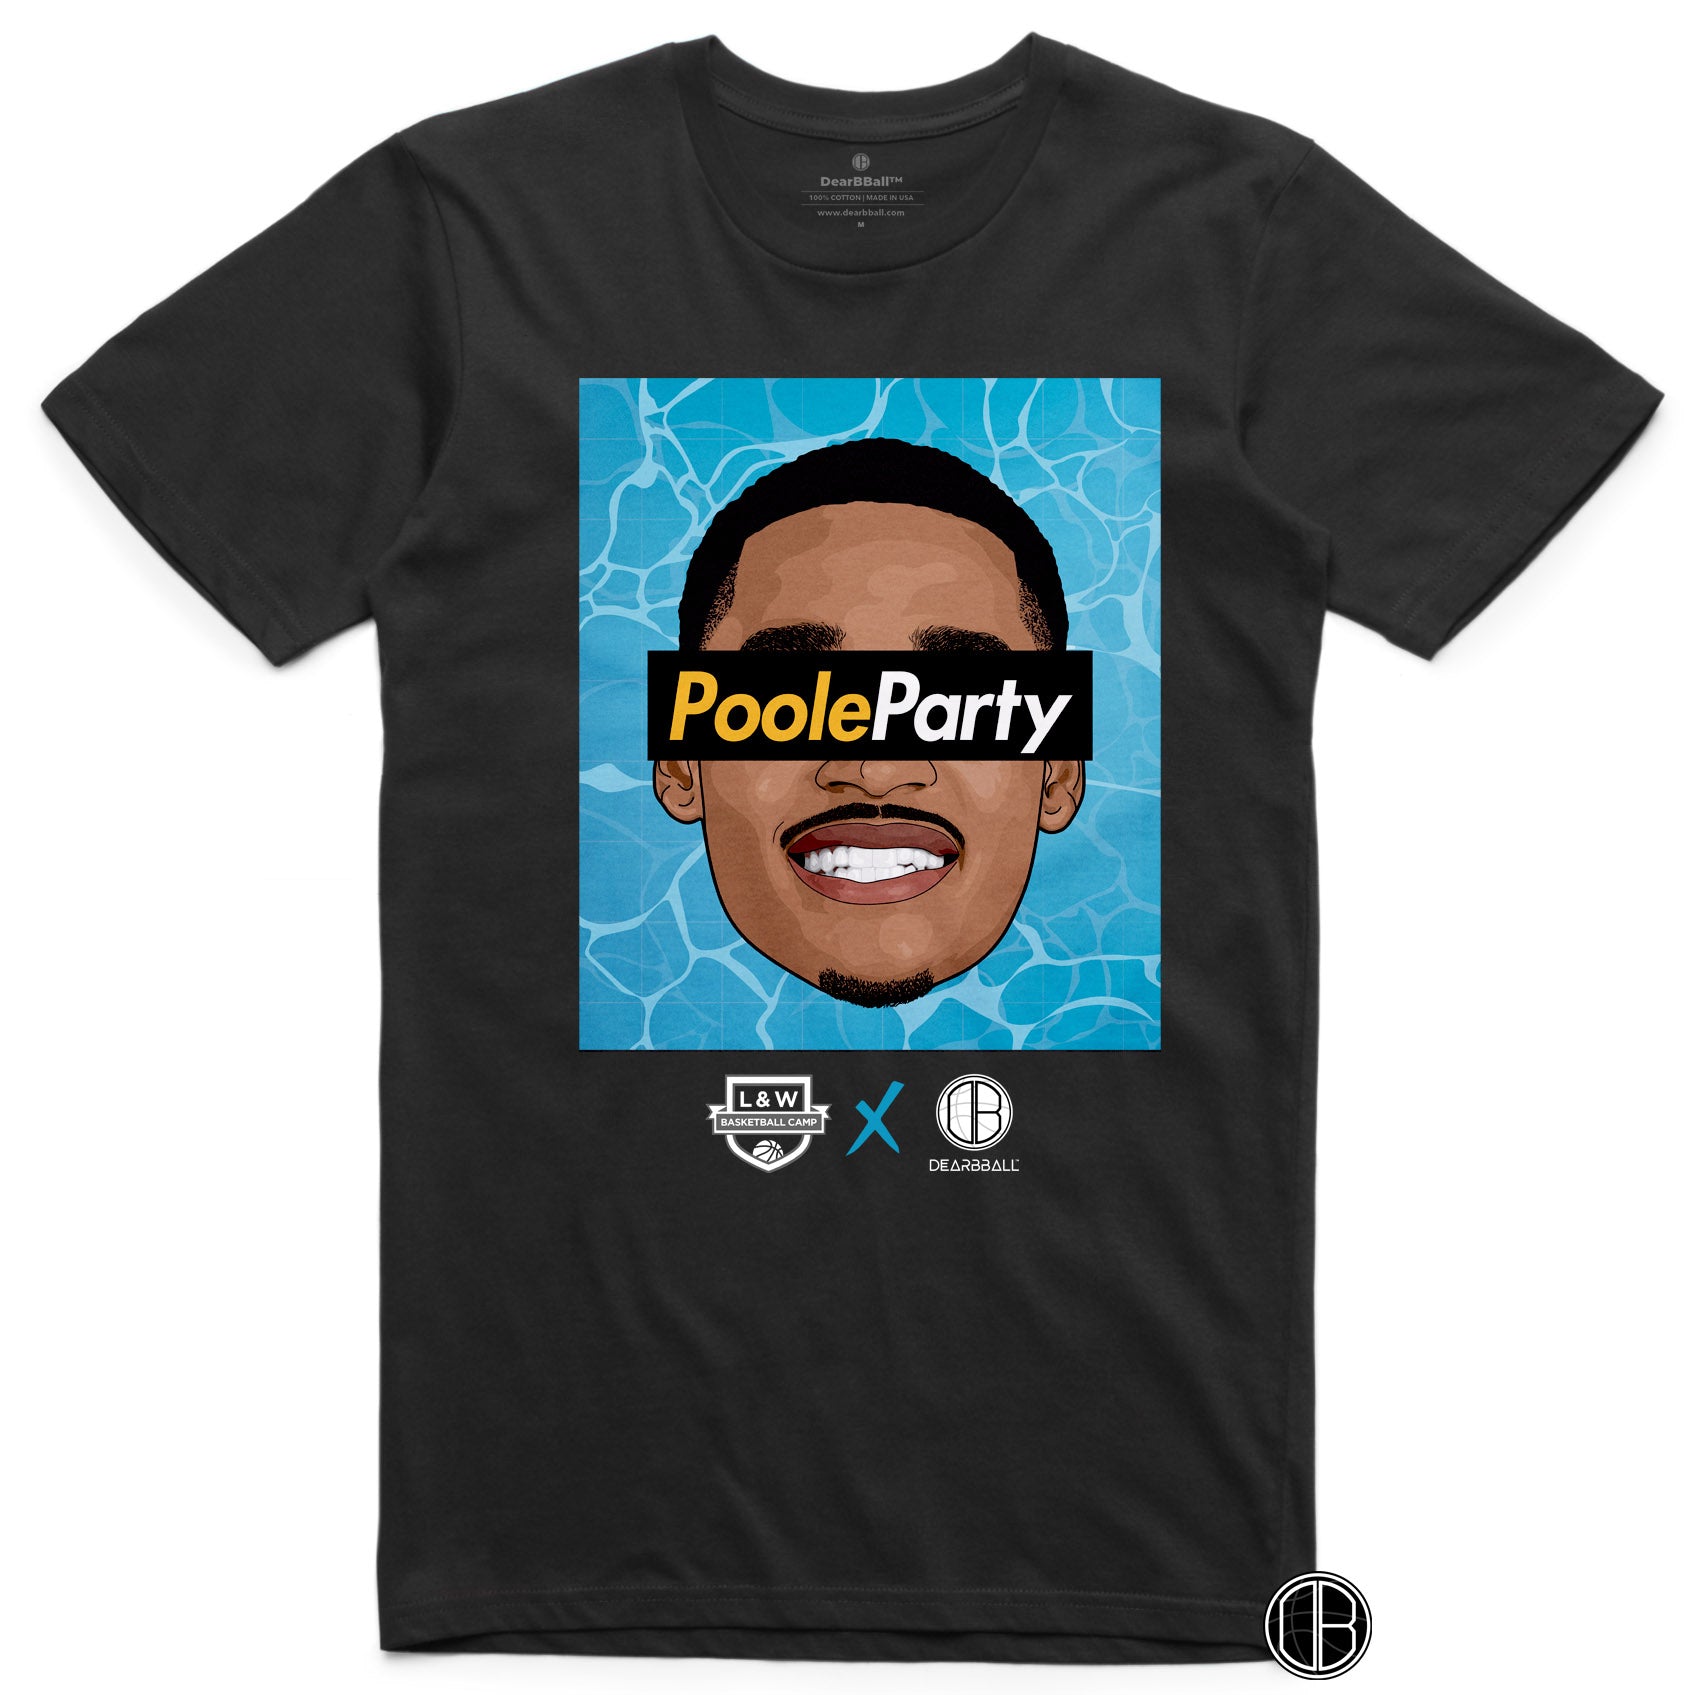 DearBBall x L&amp;W Camp T-Shirt - PooleParty